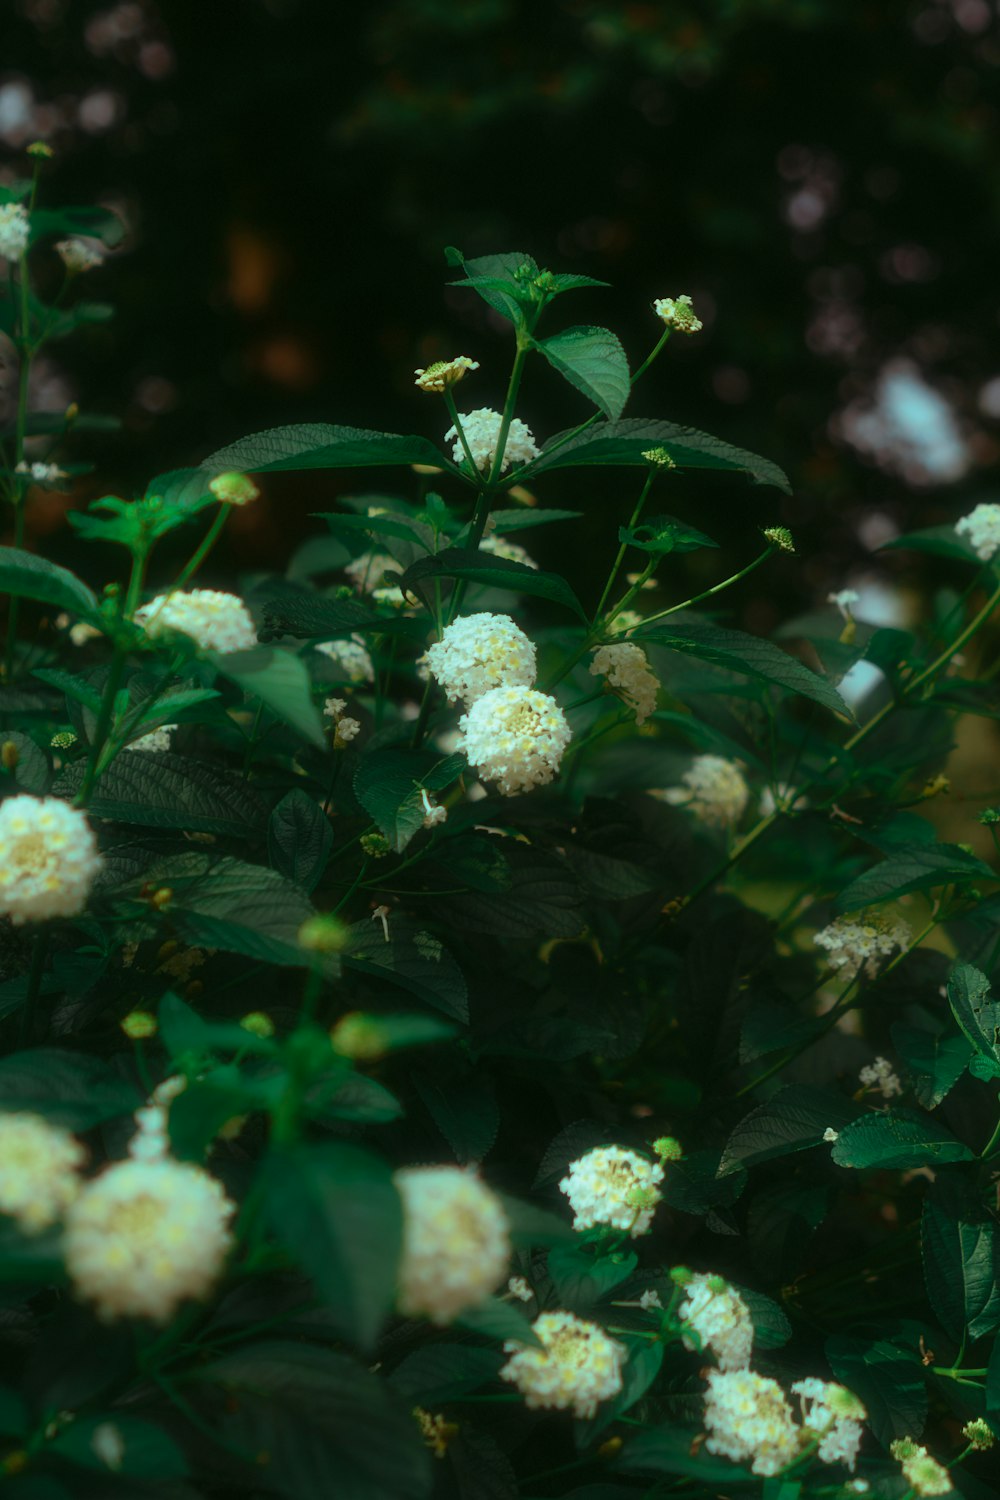 a bush with white flowers and green leaves